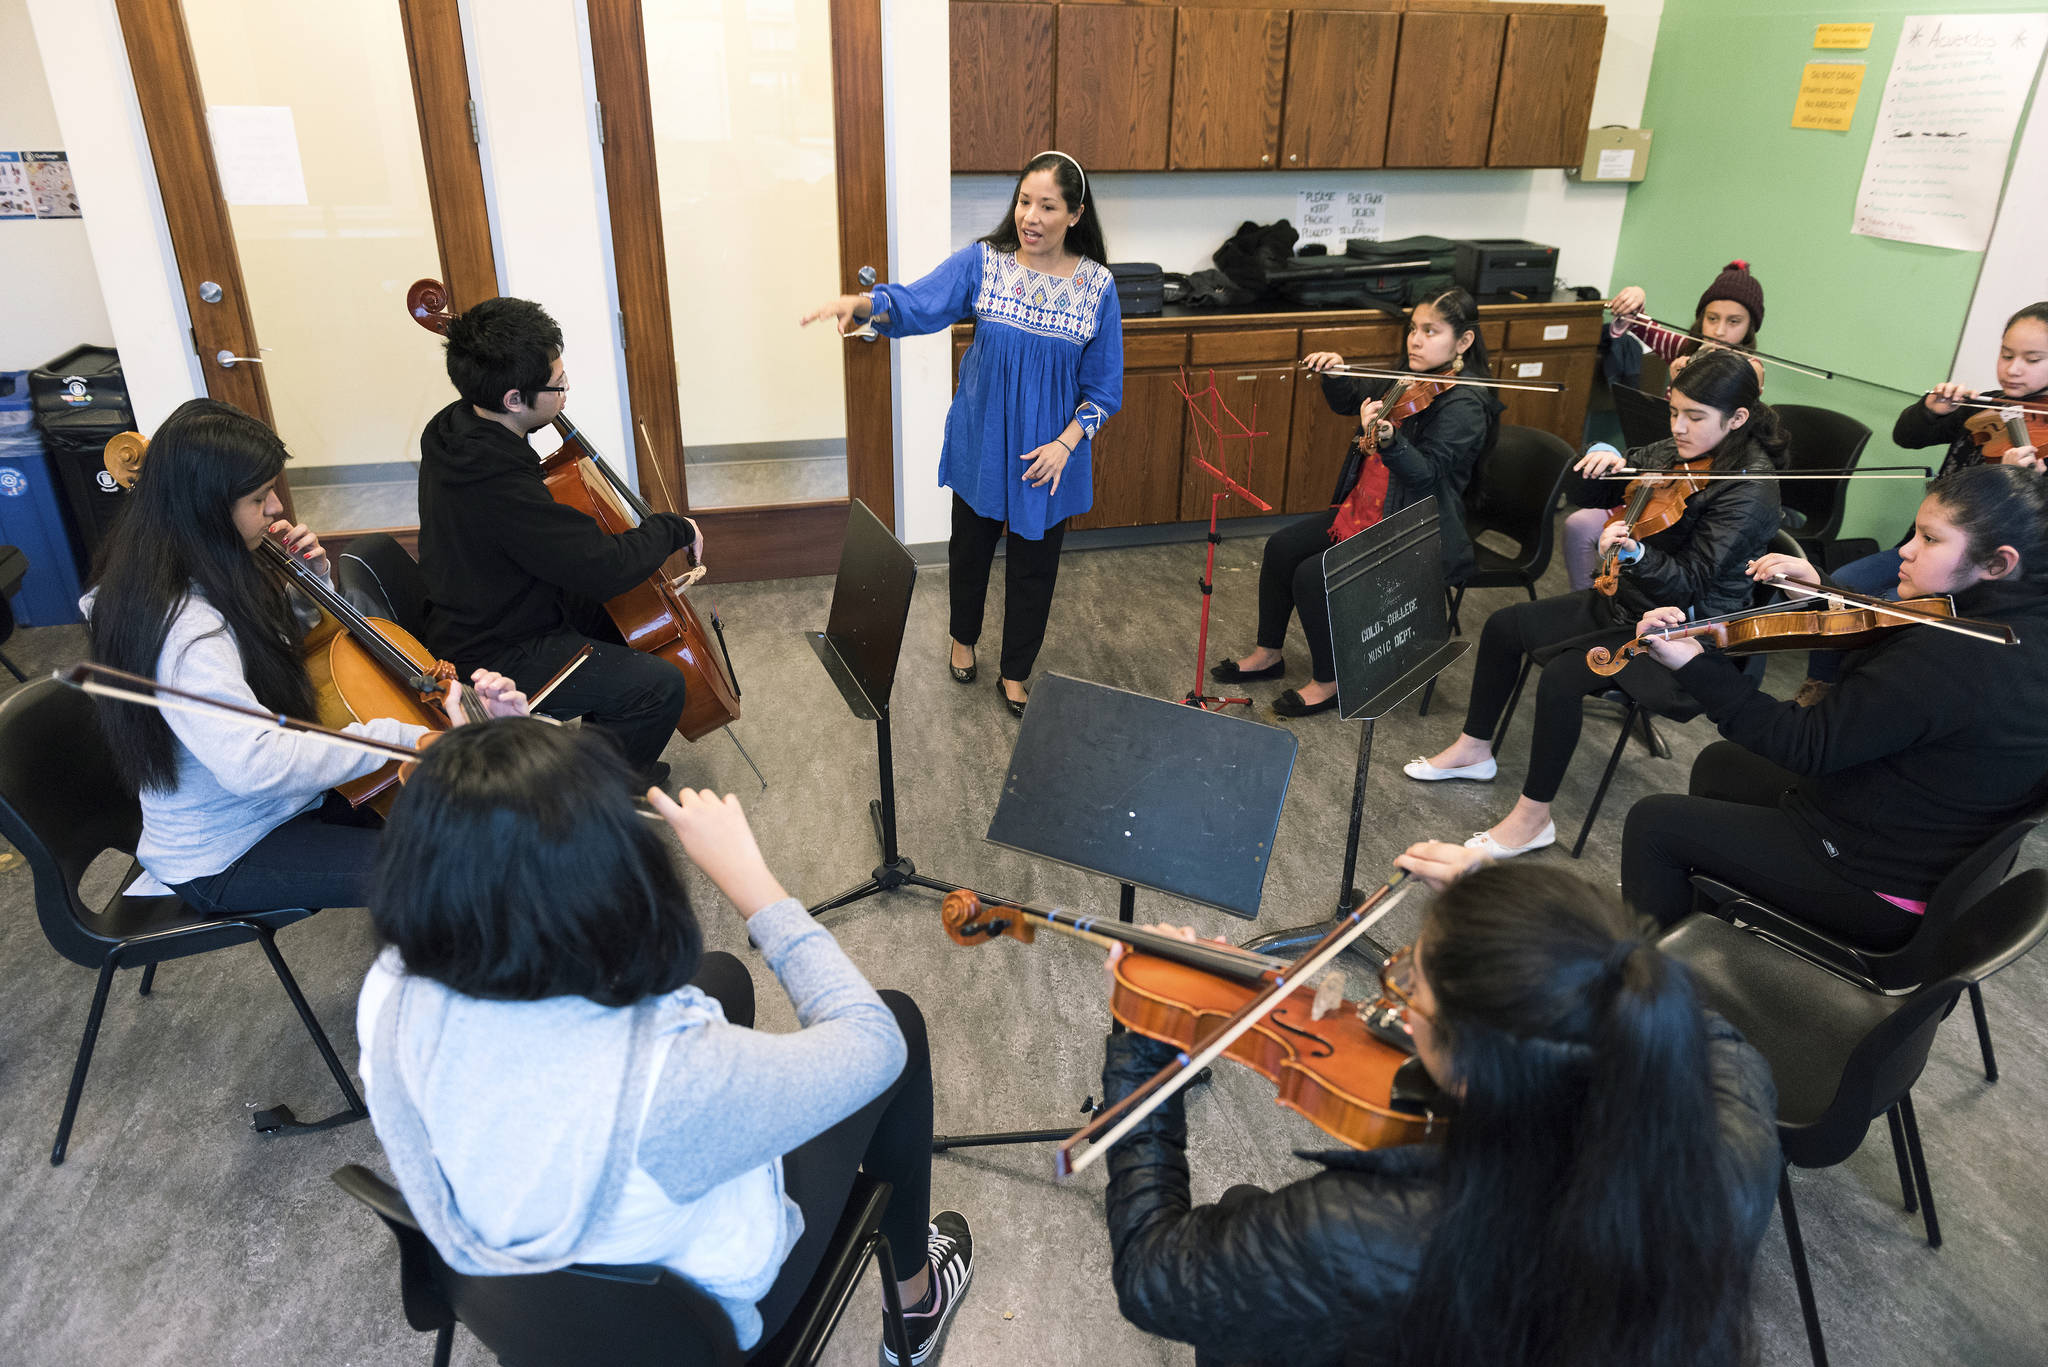 Paula Madrigal leads a Young String Project Outreach rehersal. Photo by Ted Zee